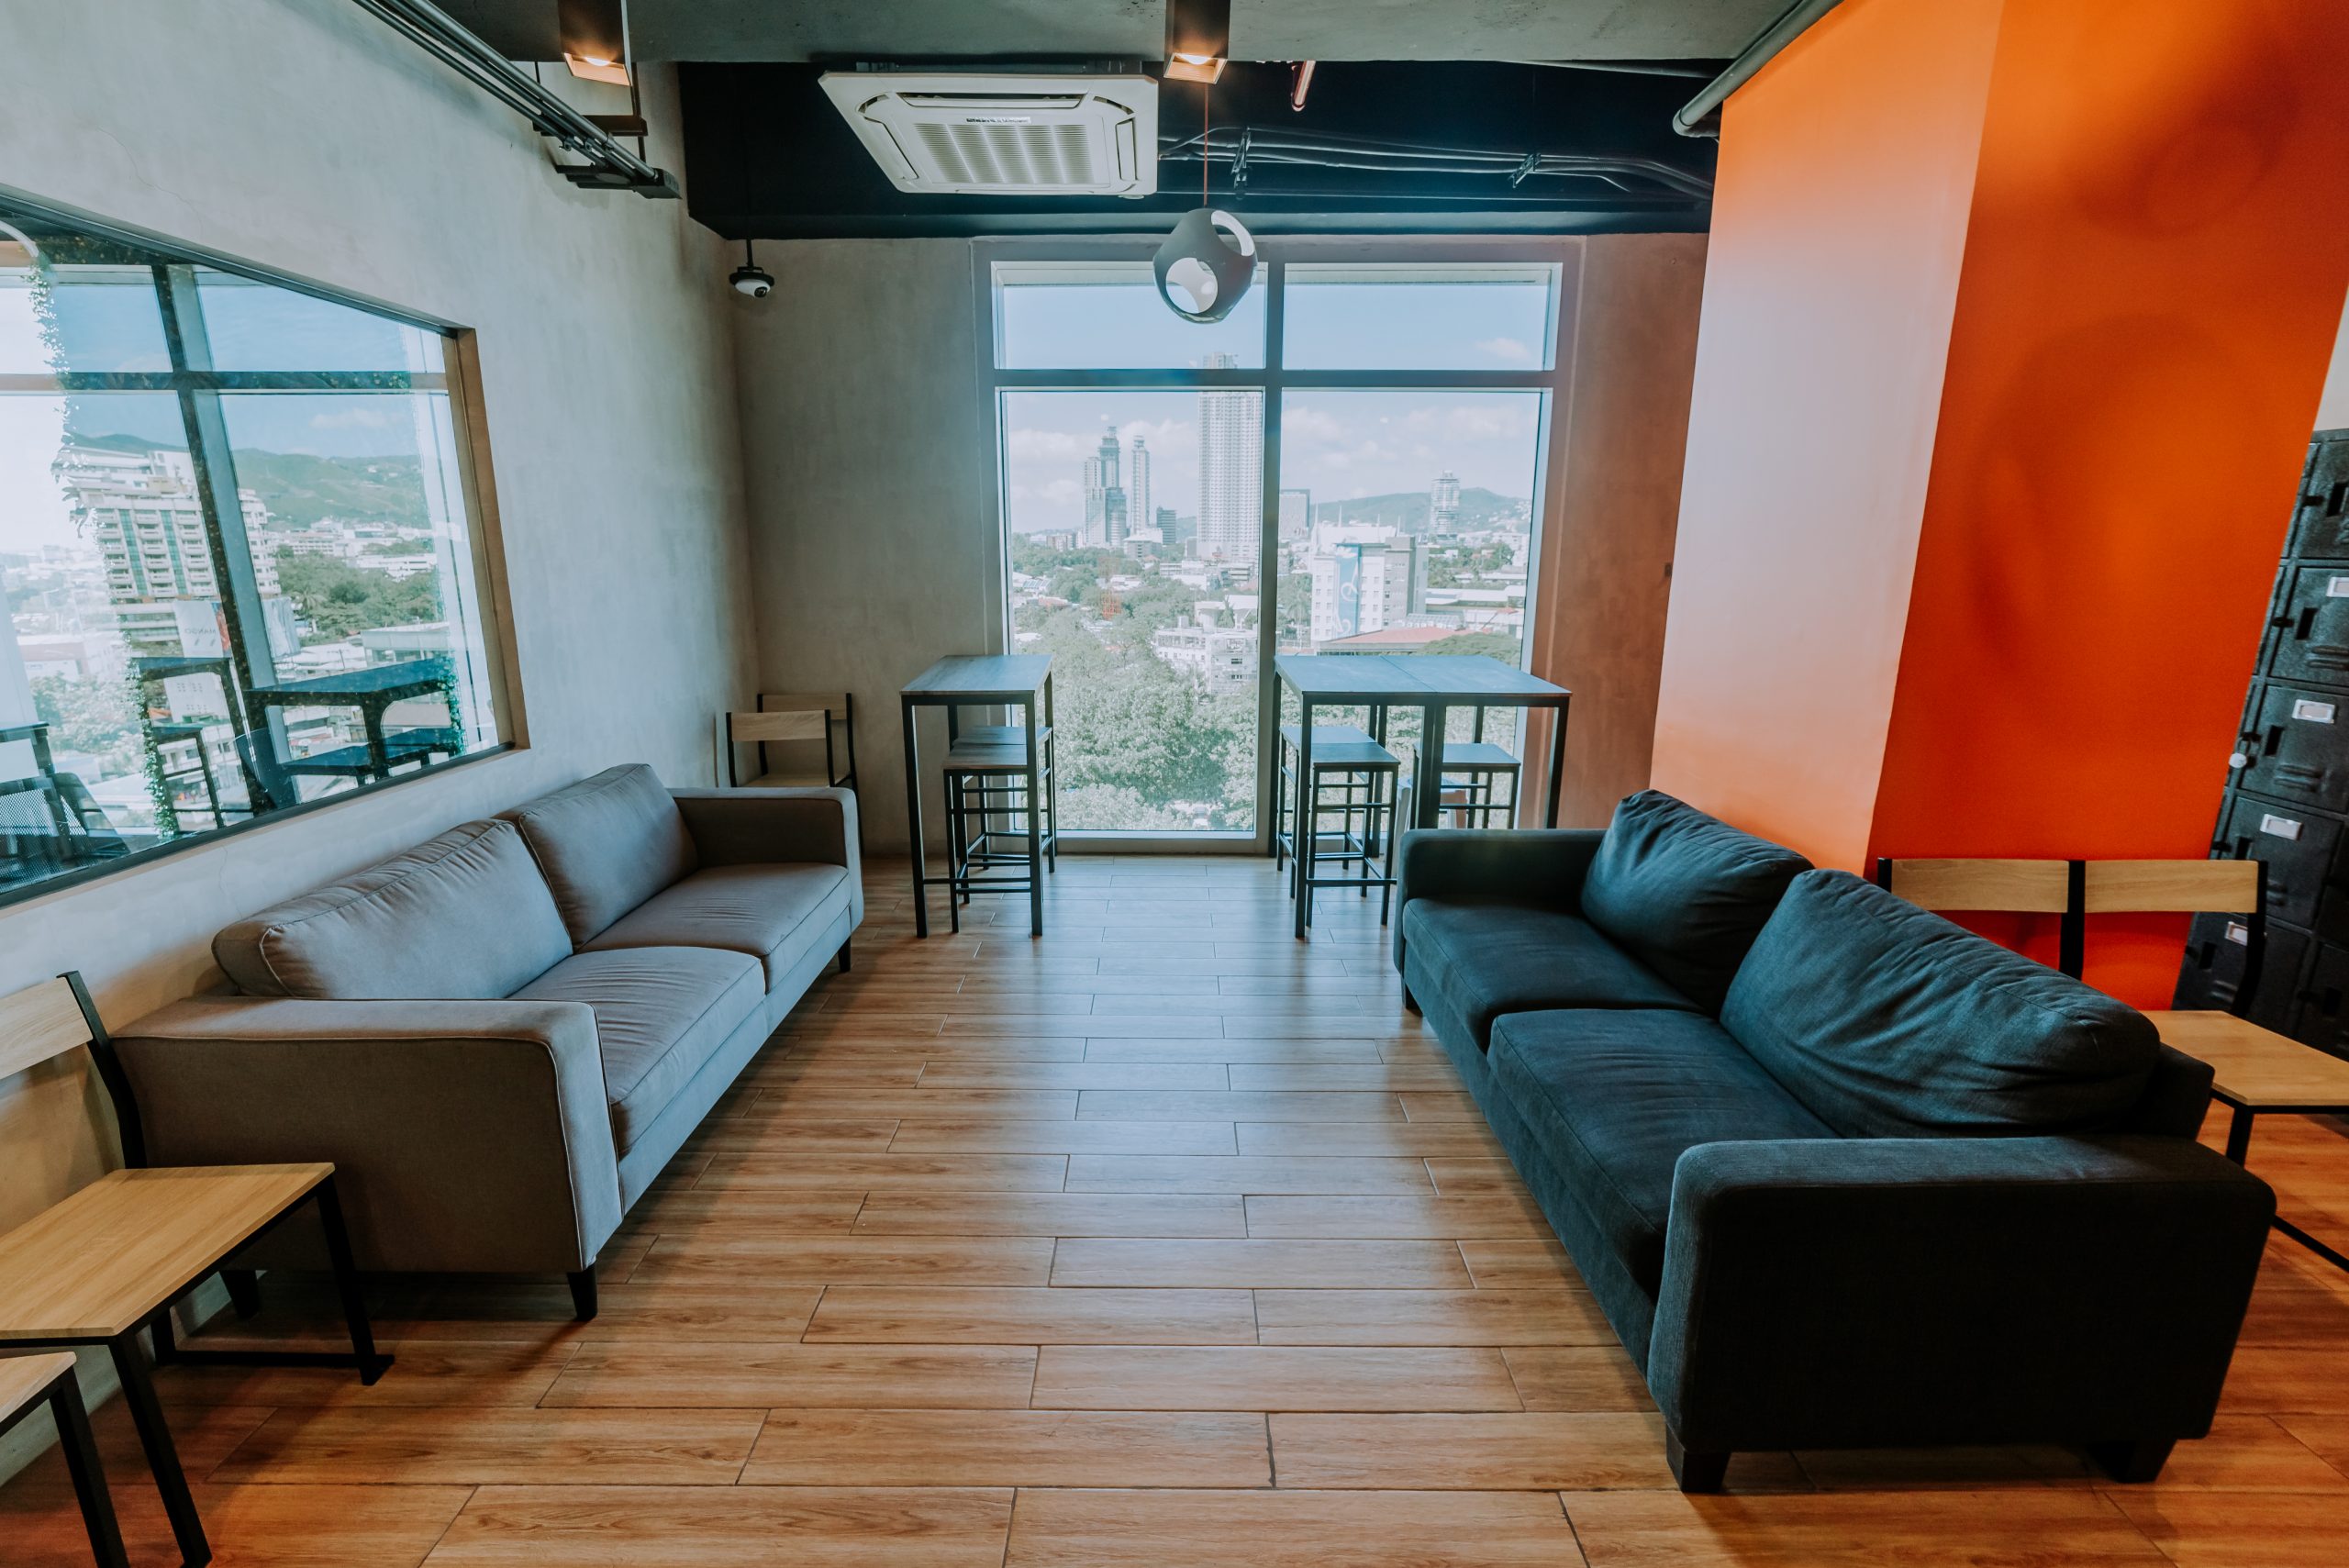 lounge area of an outsourcing company in the Philippines